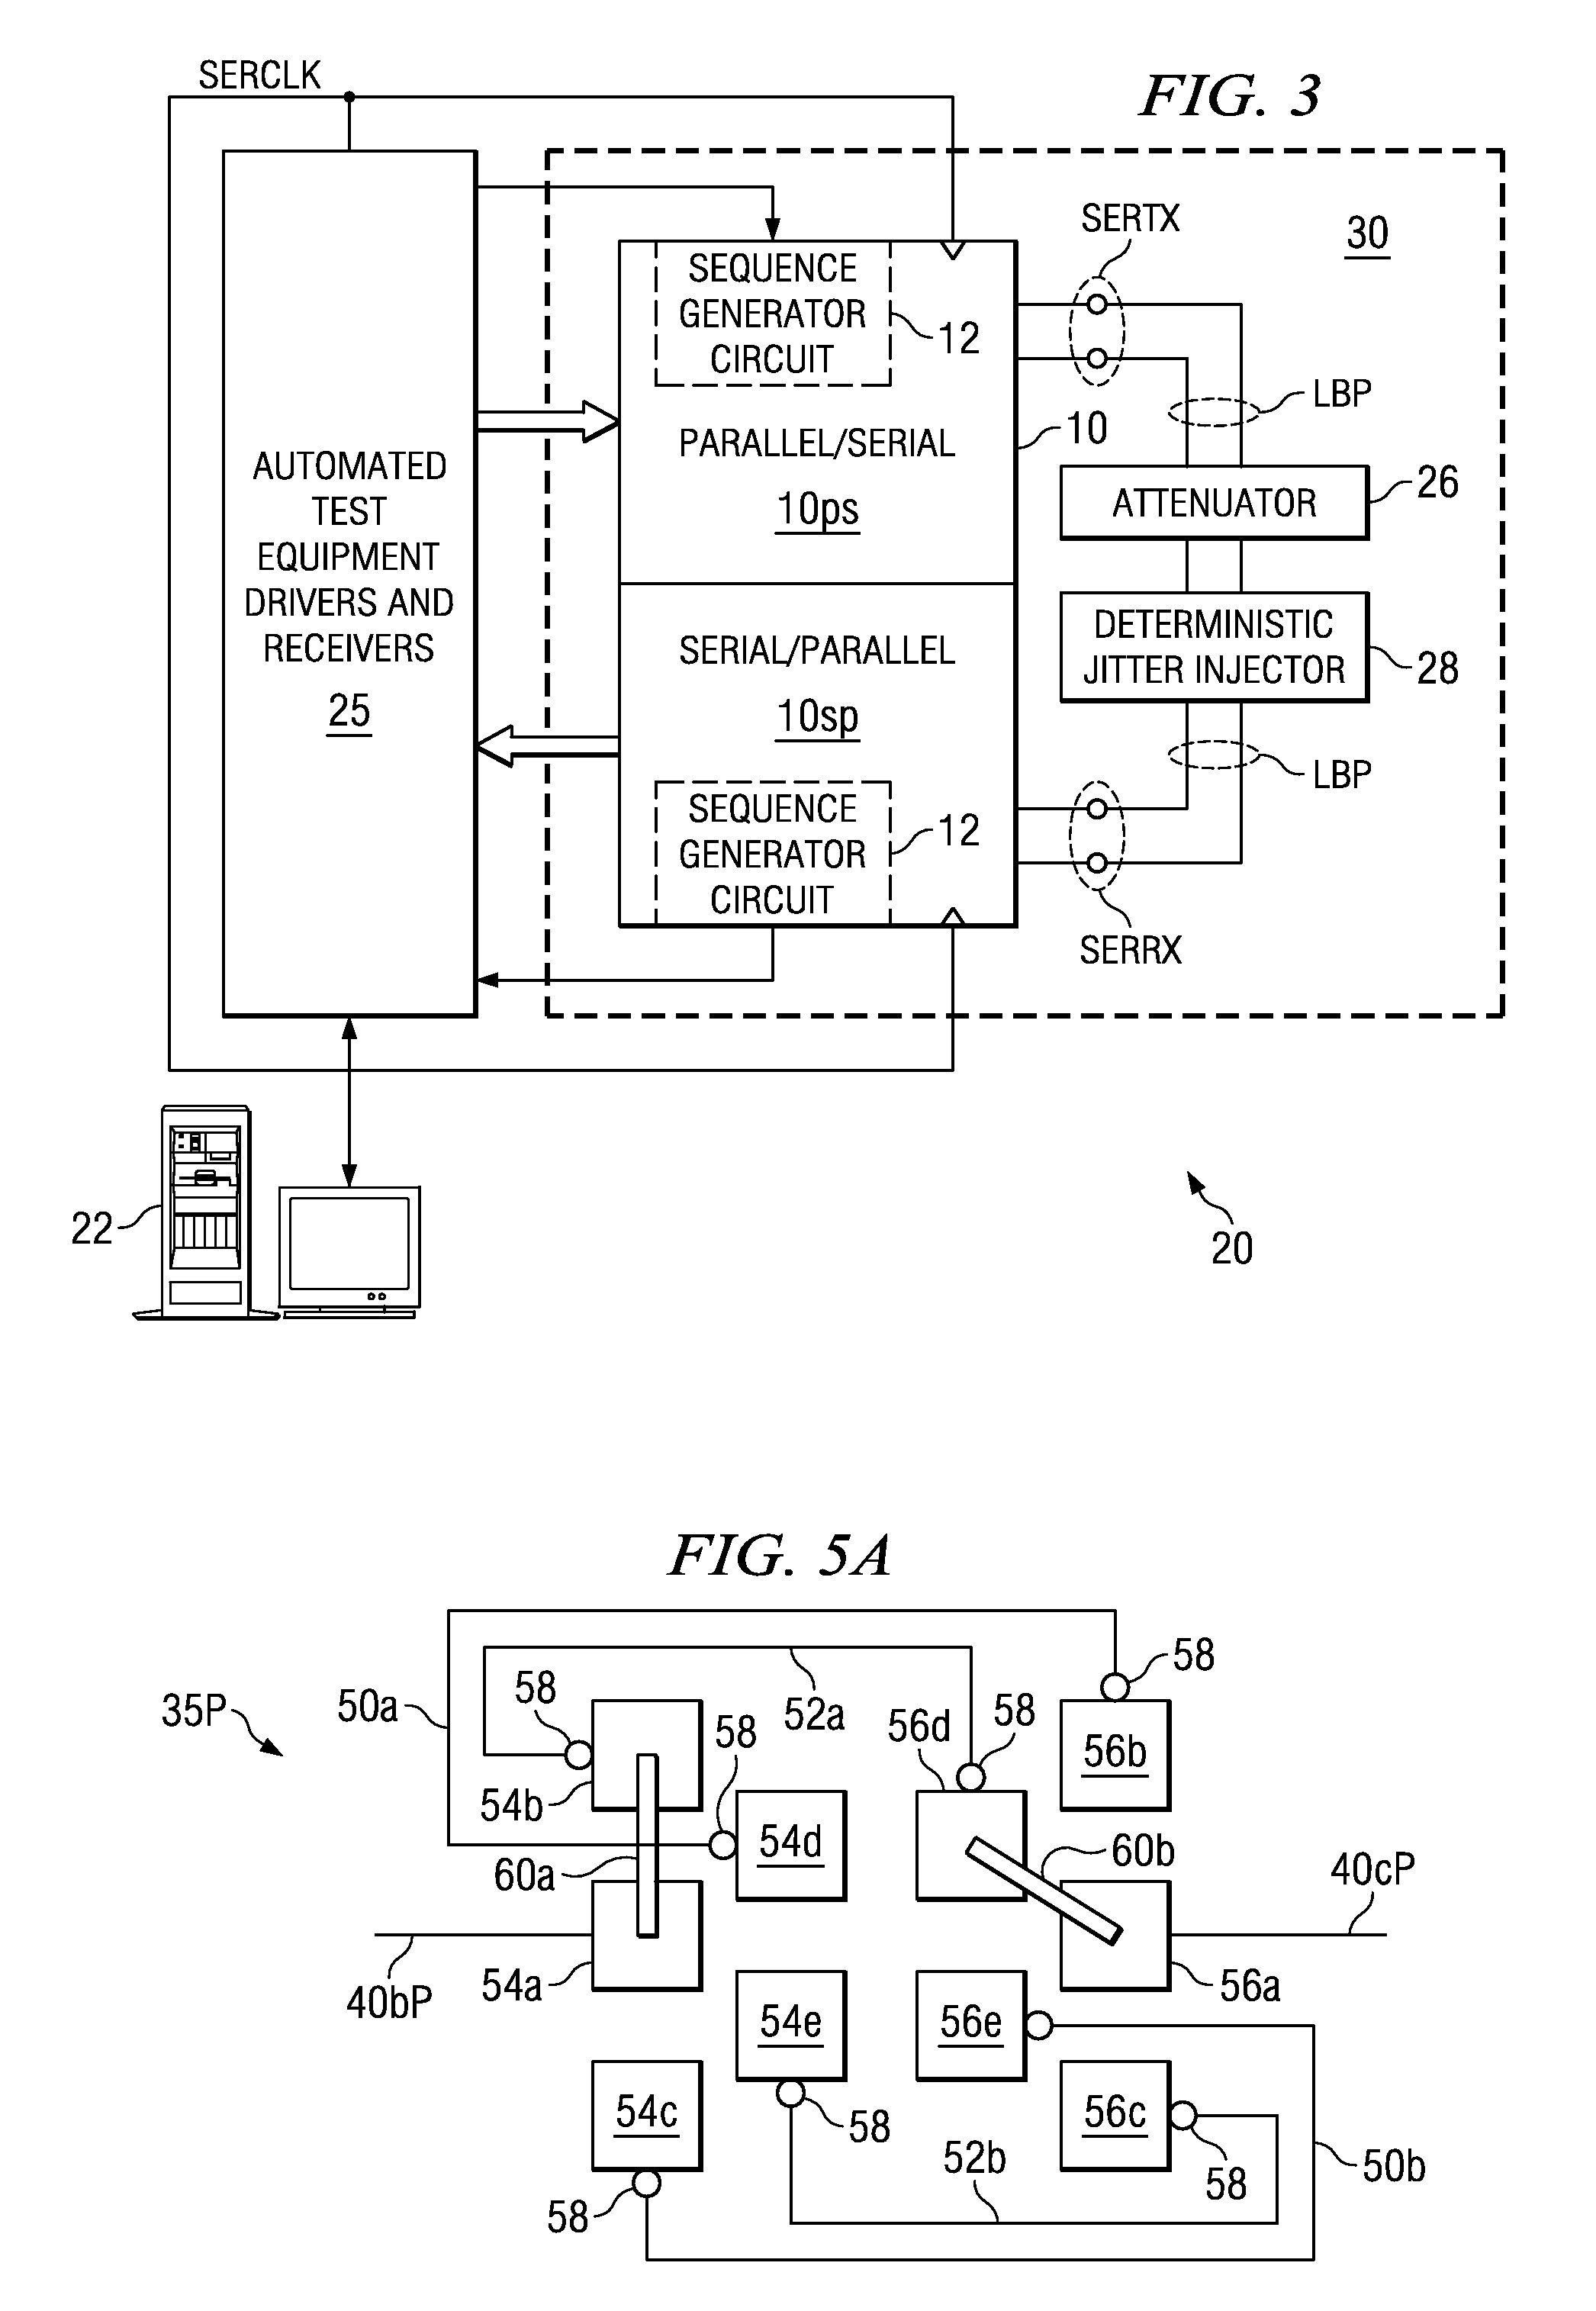 Automated test of receiver sensitivity and receiver jitter tolerance of an integrated circuit